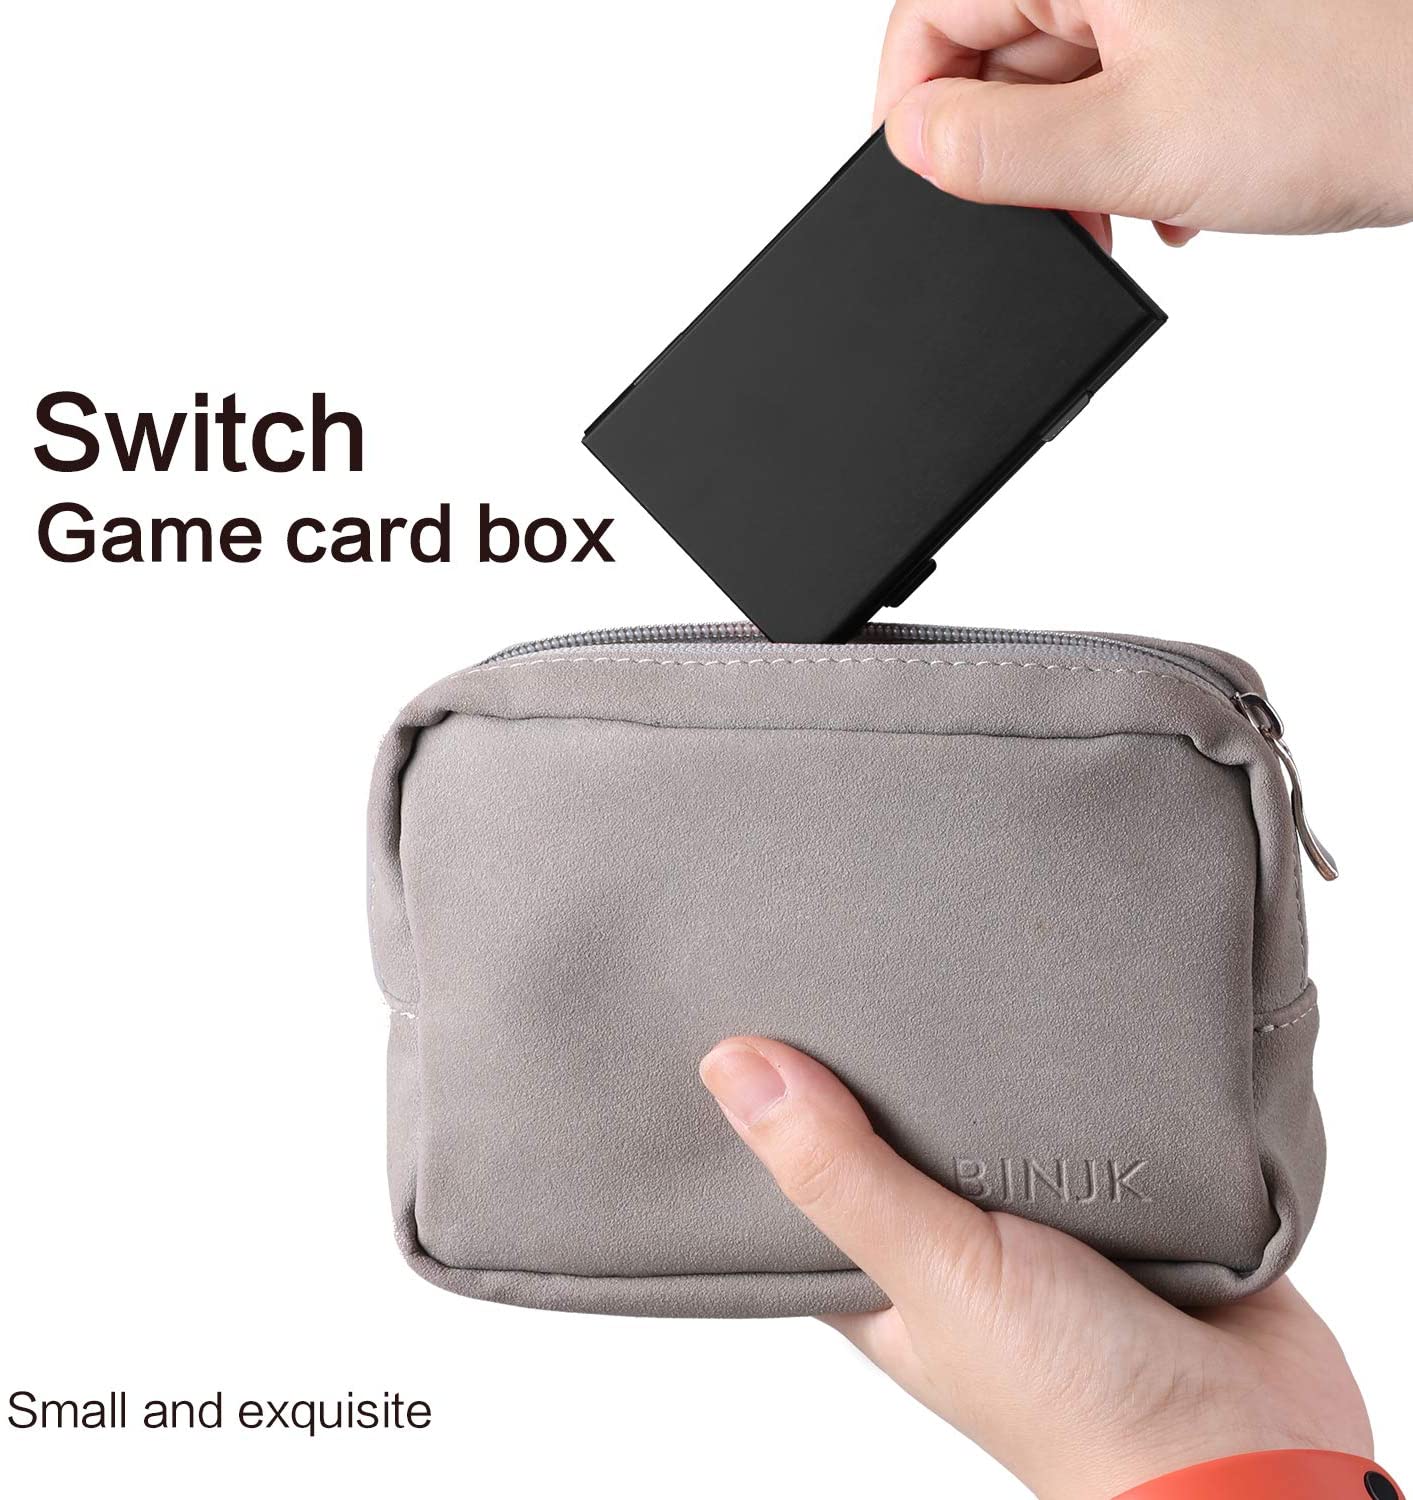 Premium Game Card Case for Nintendo Switch, Aluminum Game Cartridge Holder for Nintendo Switch (Hold 6 Game Cards) - Black - ECHZOVE